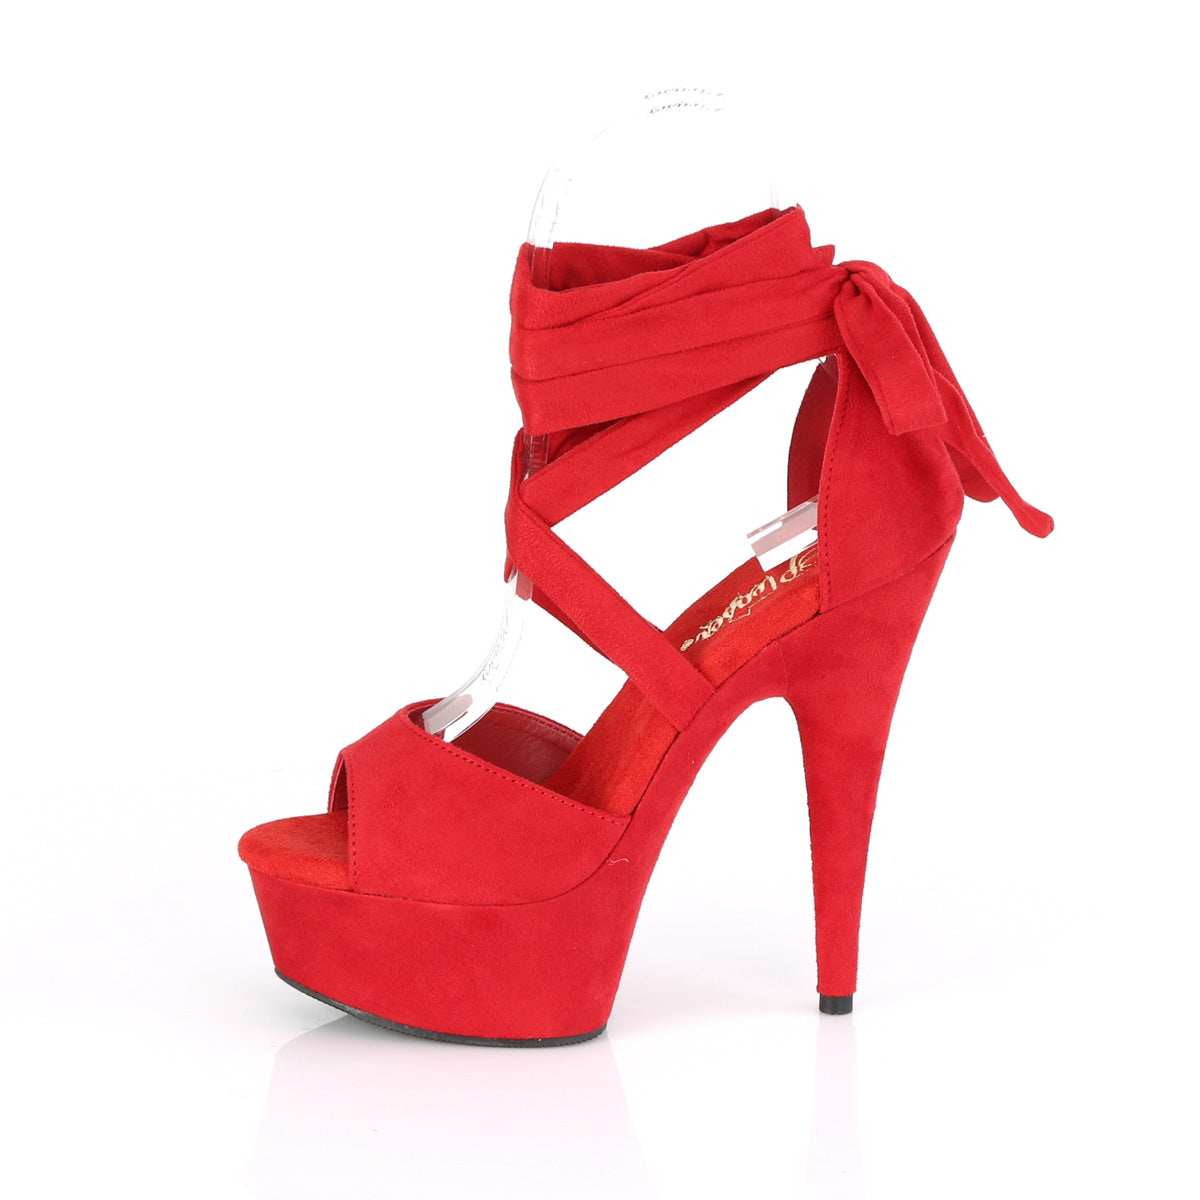 Pleaser Womens Sandals DELIGHT-679 Red Faux Suede/Red Faux Suede